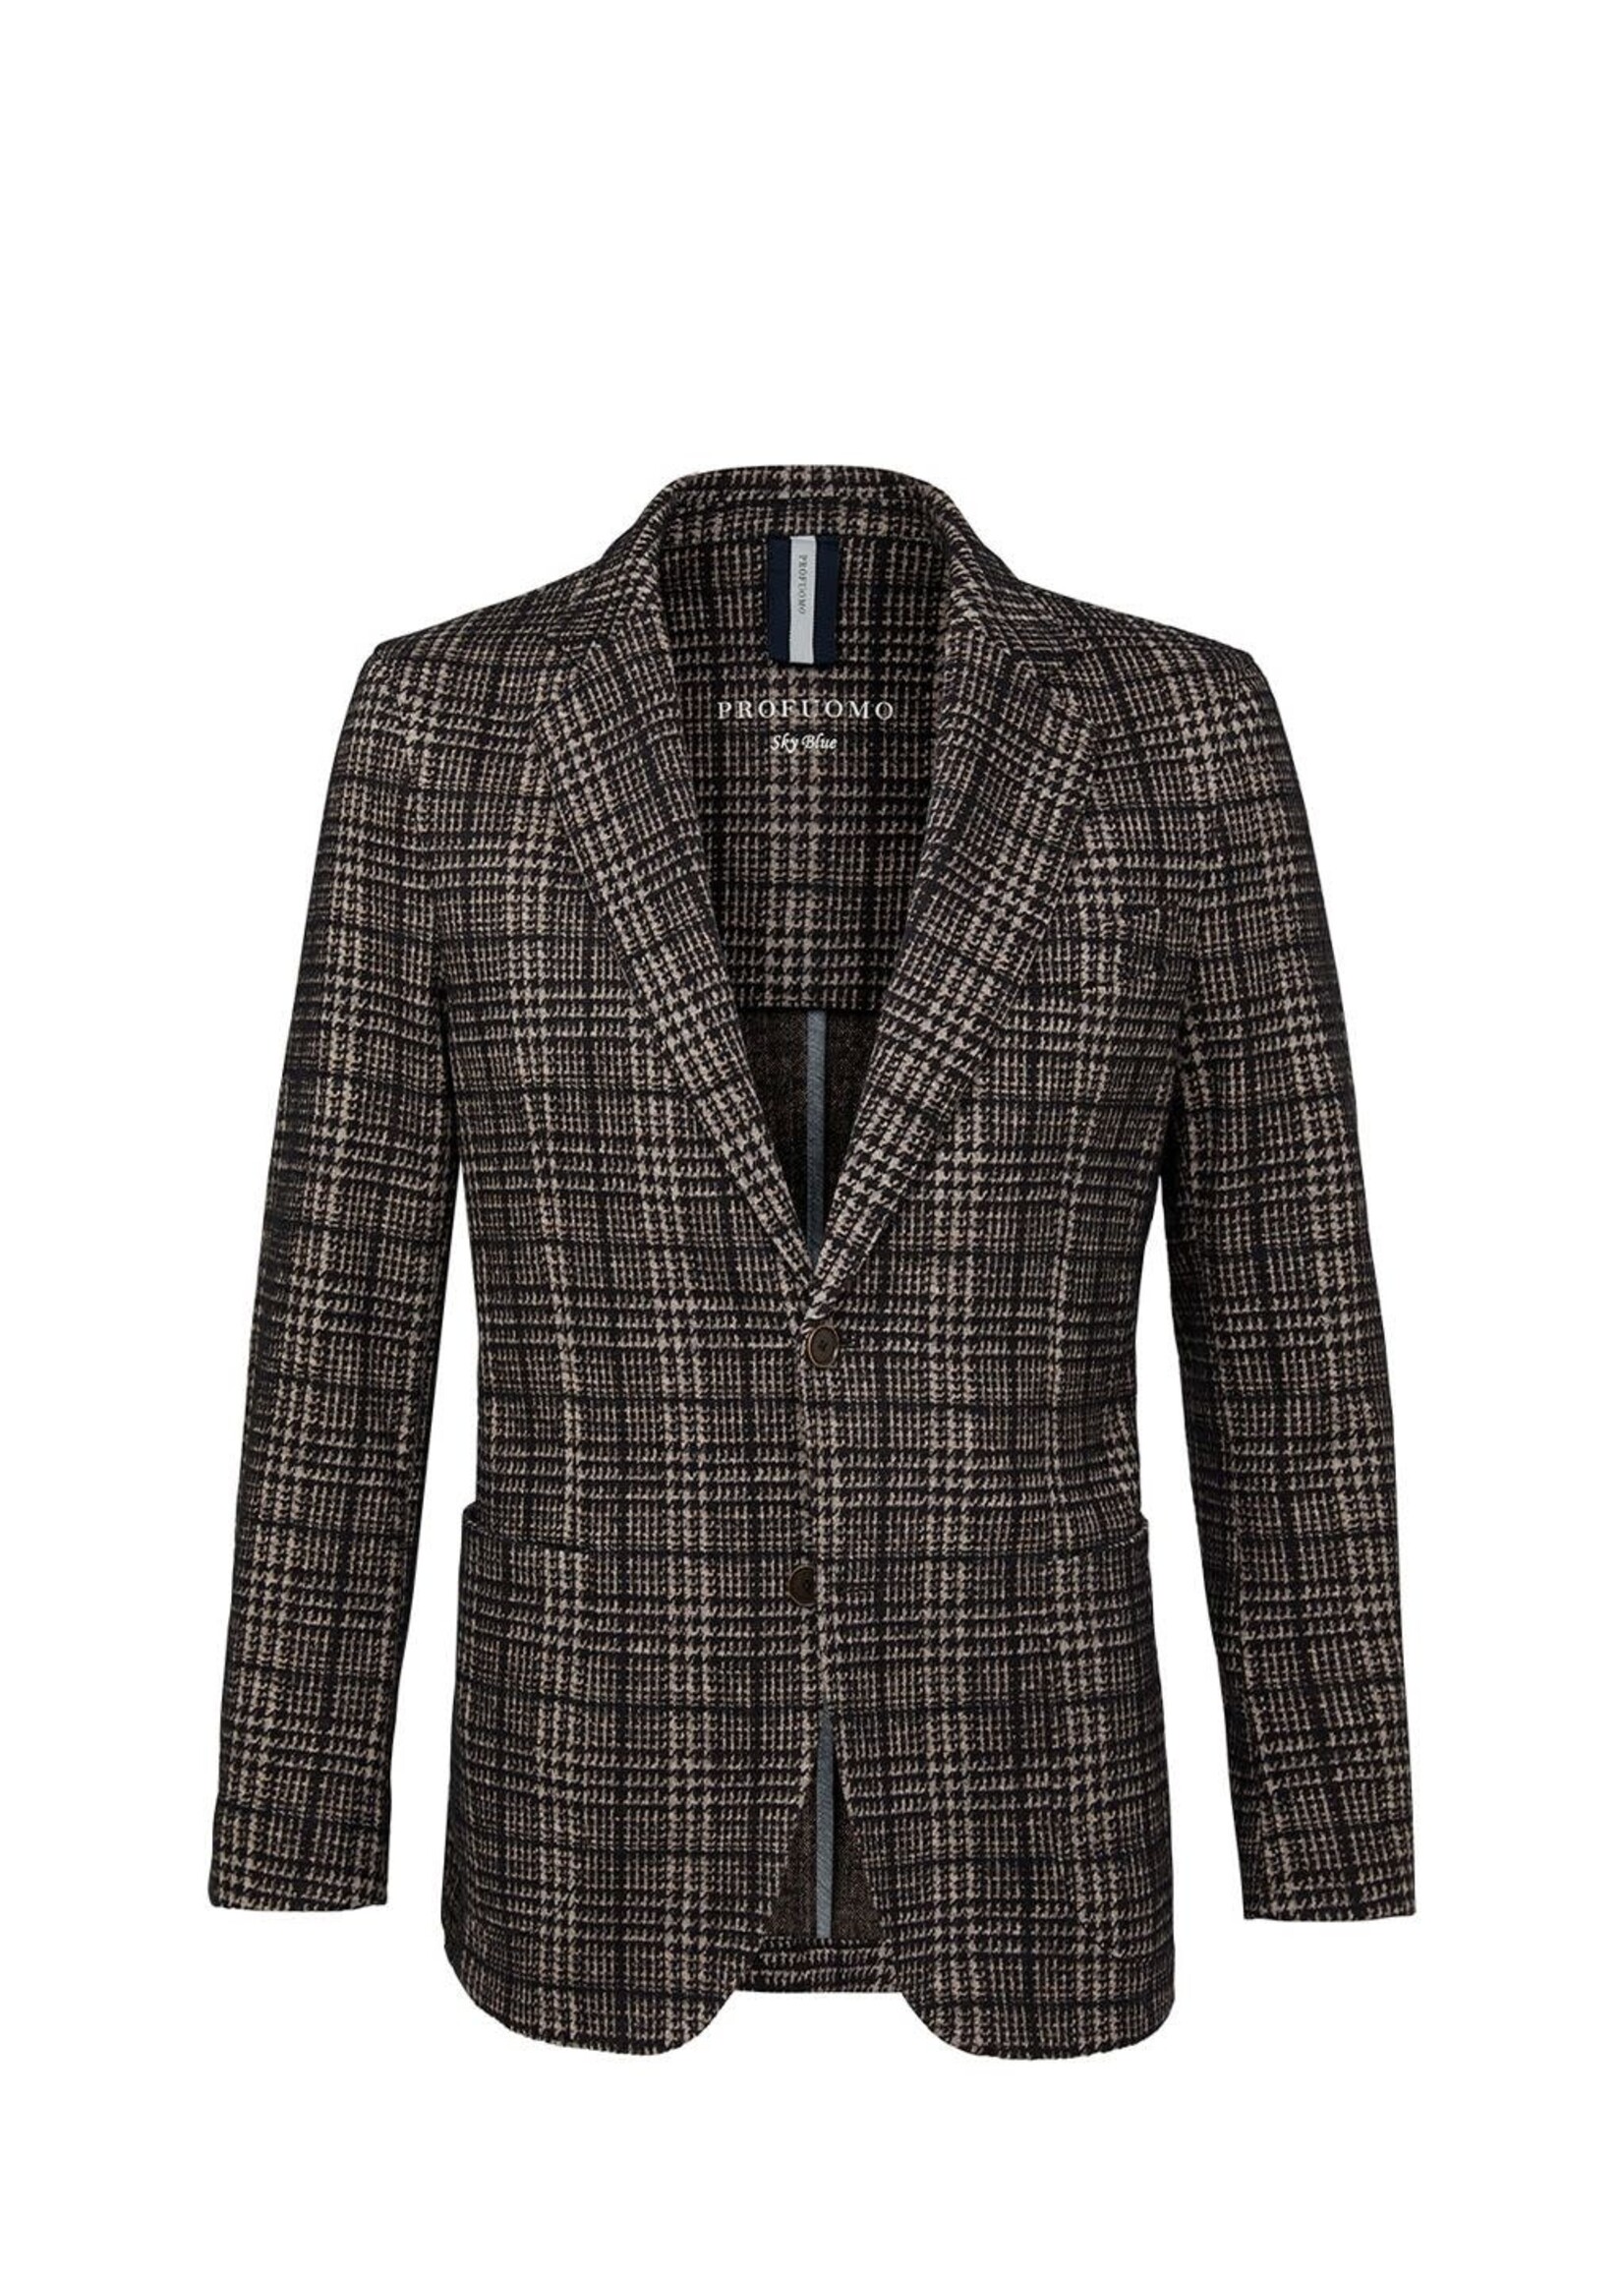 Profuomo Brown Checked Knitted Jacket 46